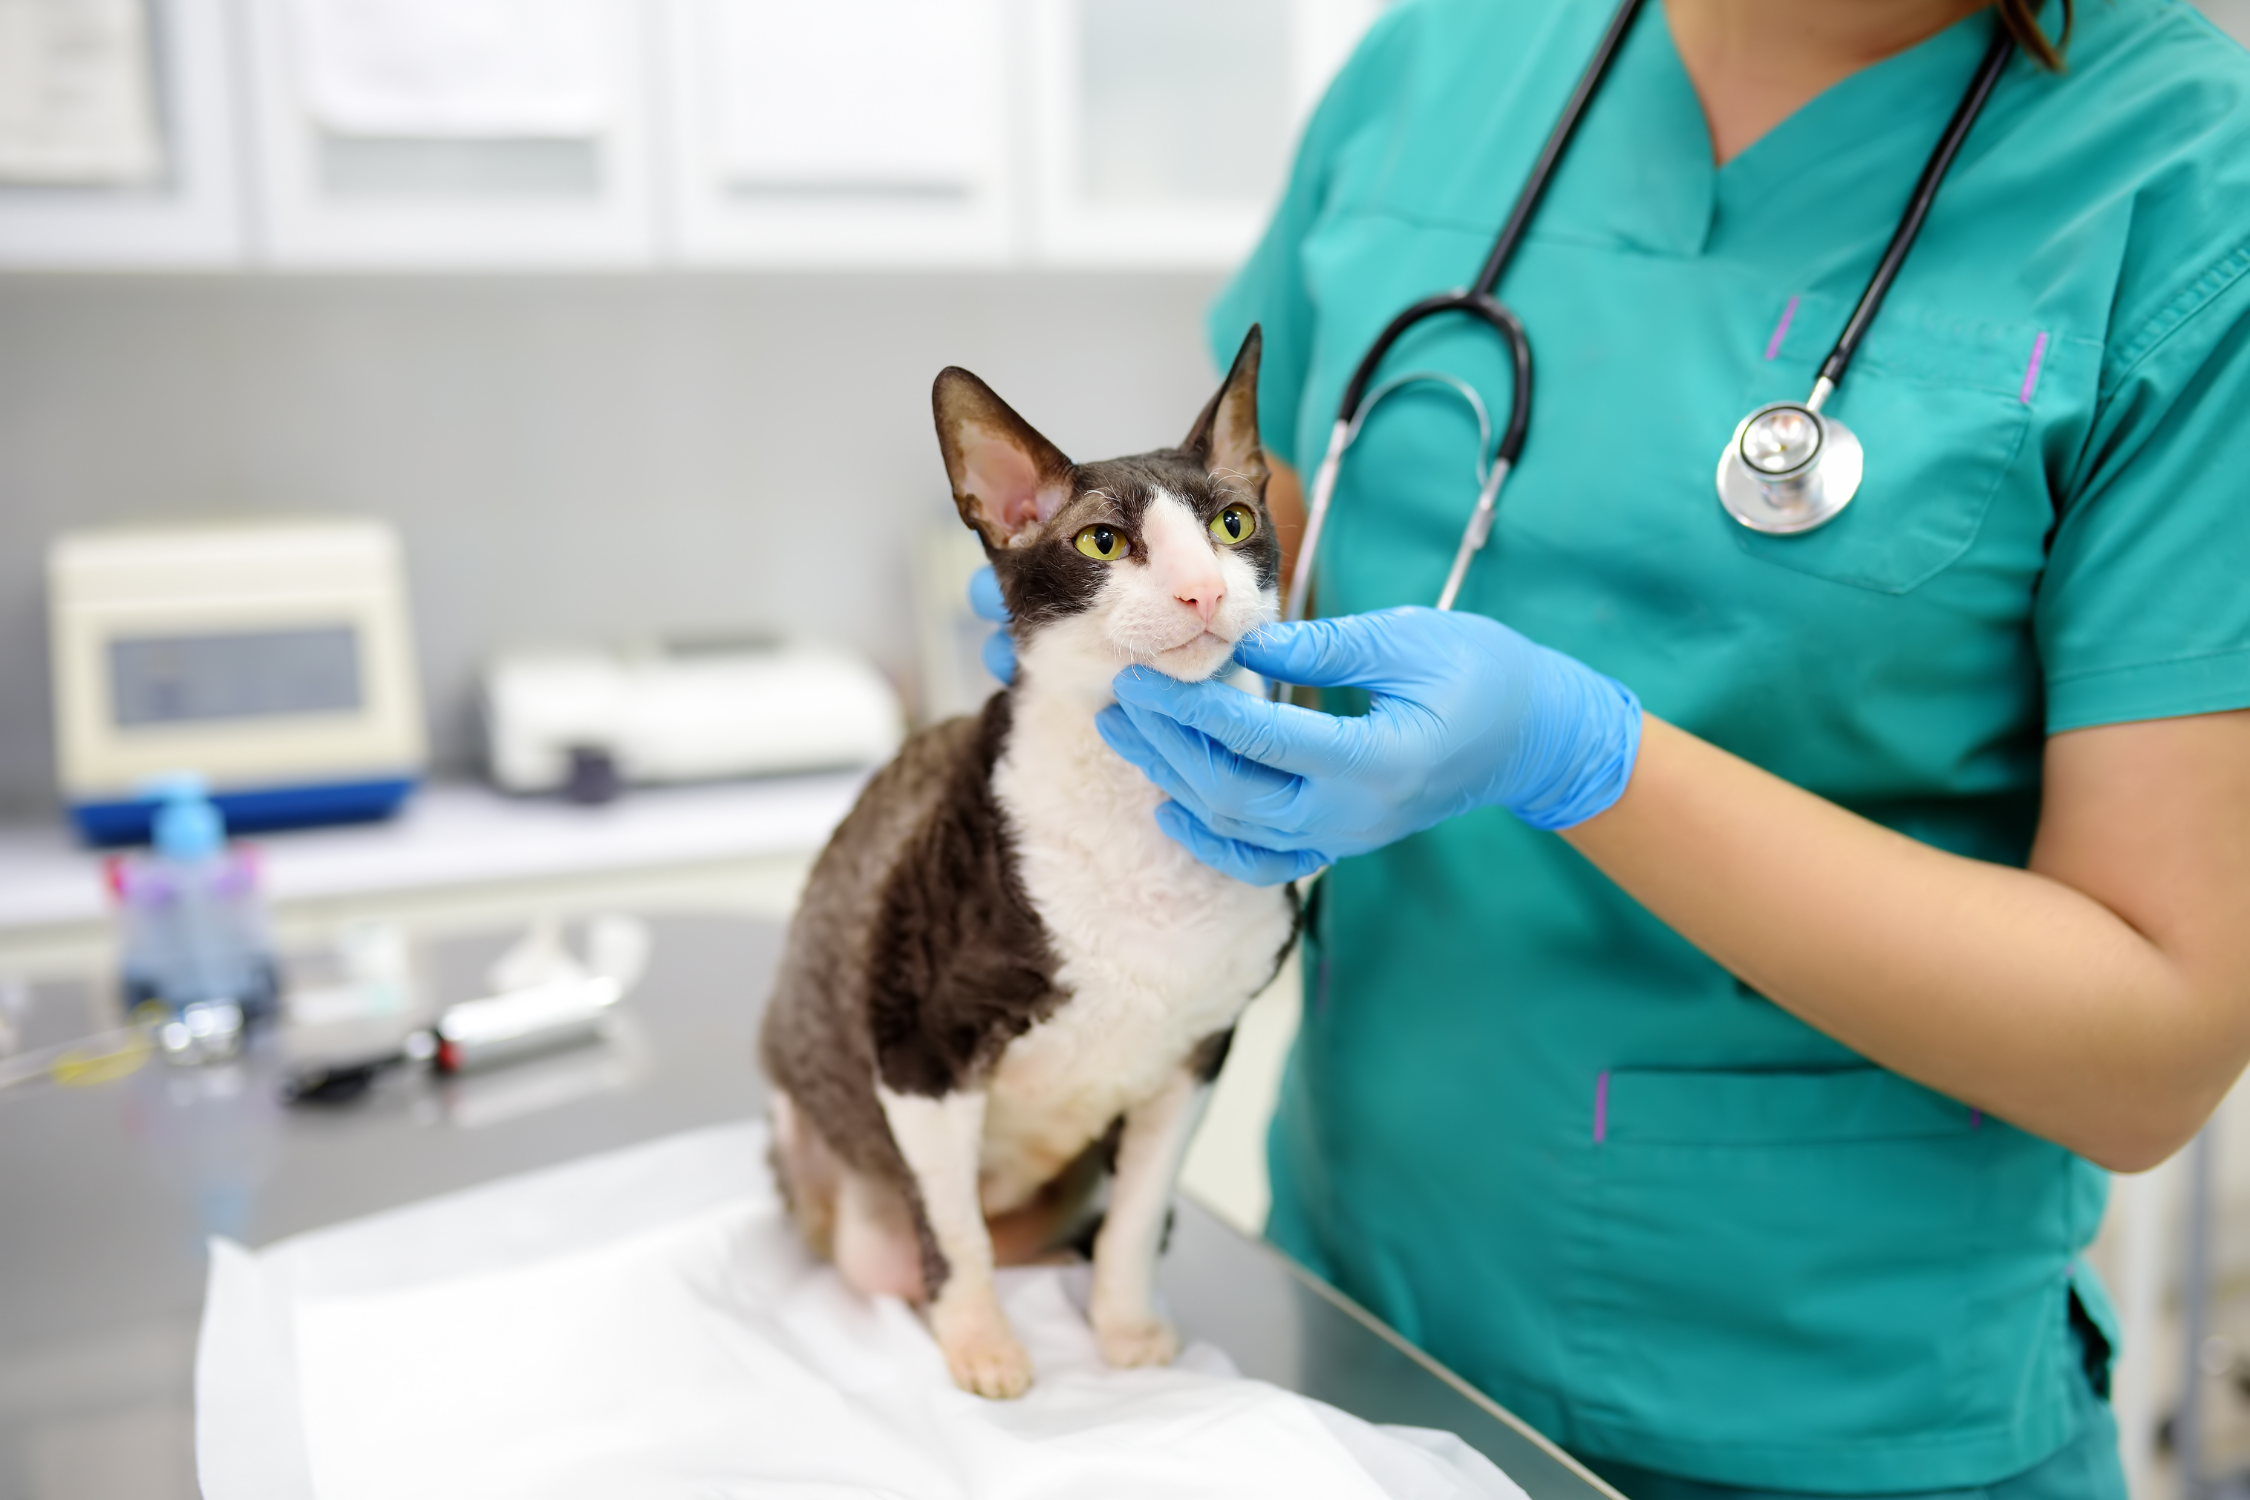 What is “Basic Veterinary Care”?